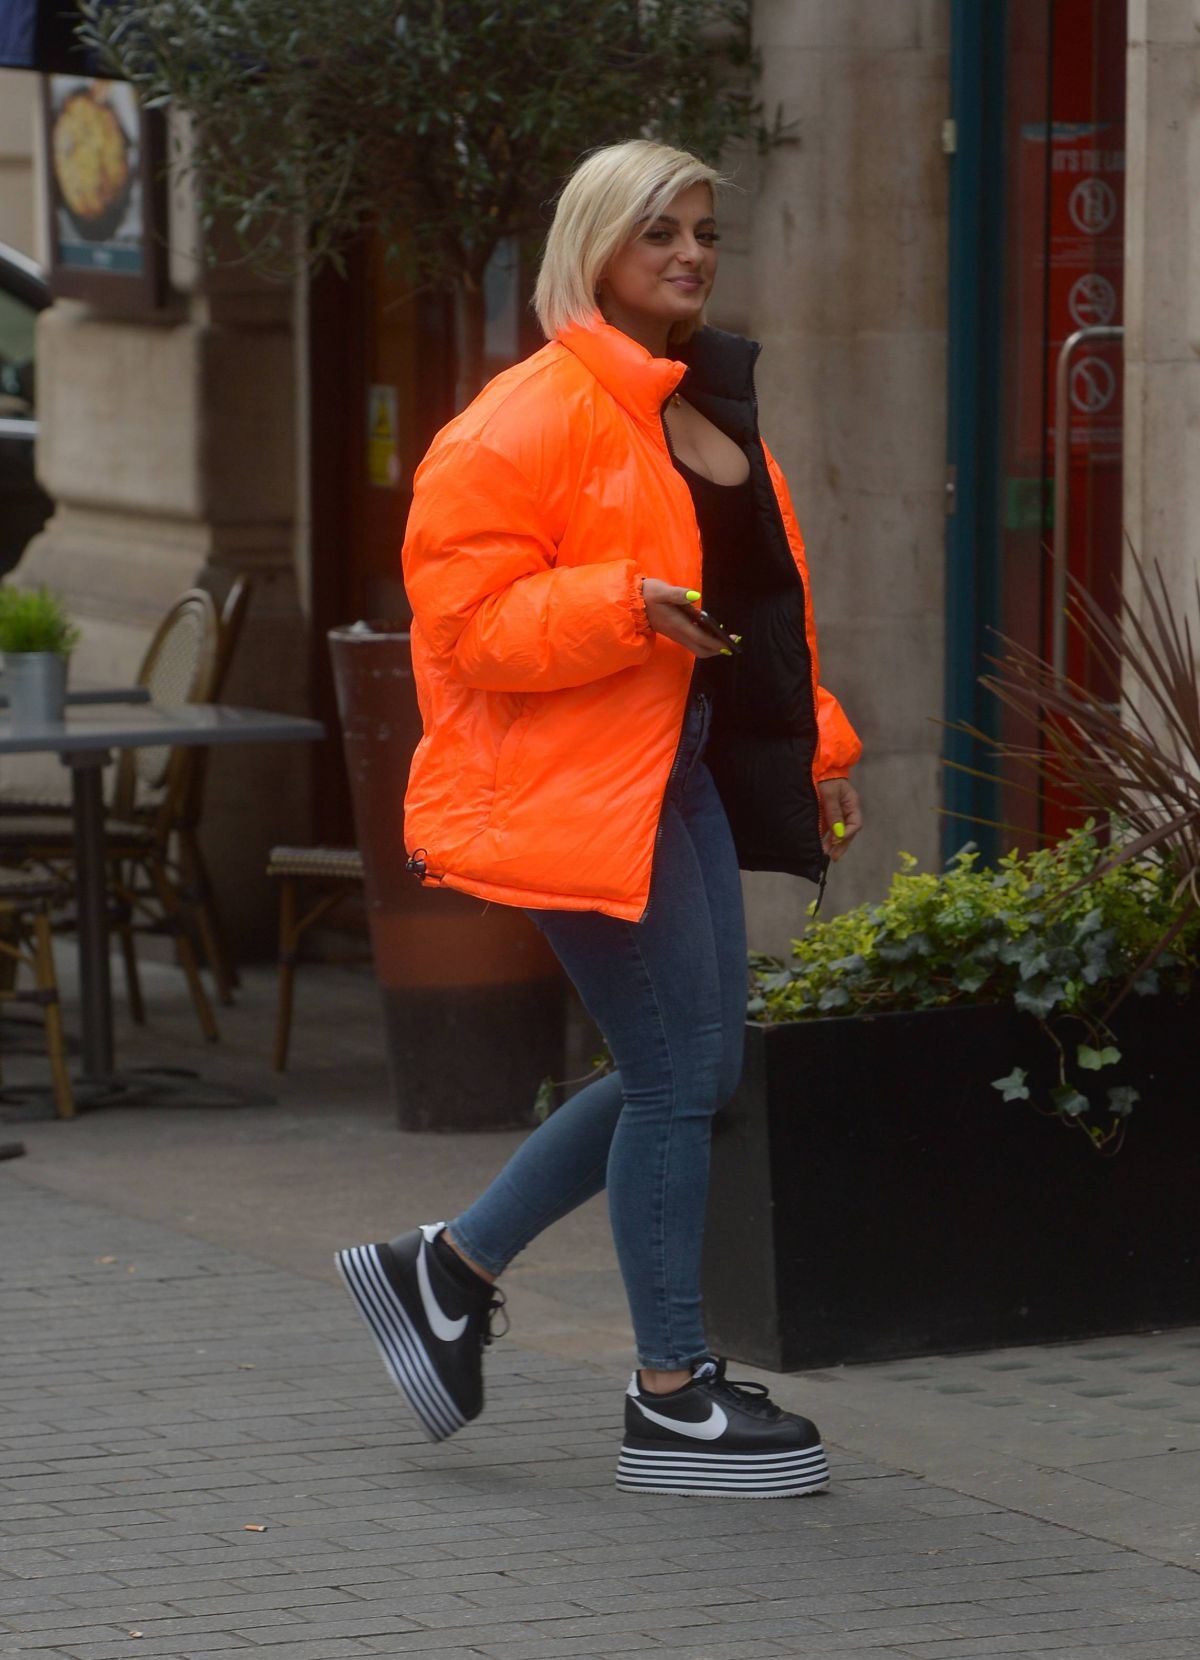 bebe-rexha-out-and-about-in-london-04-04-2019-1.jpg